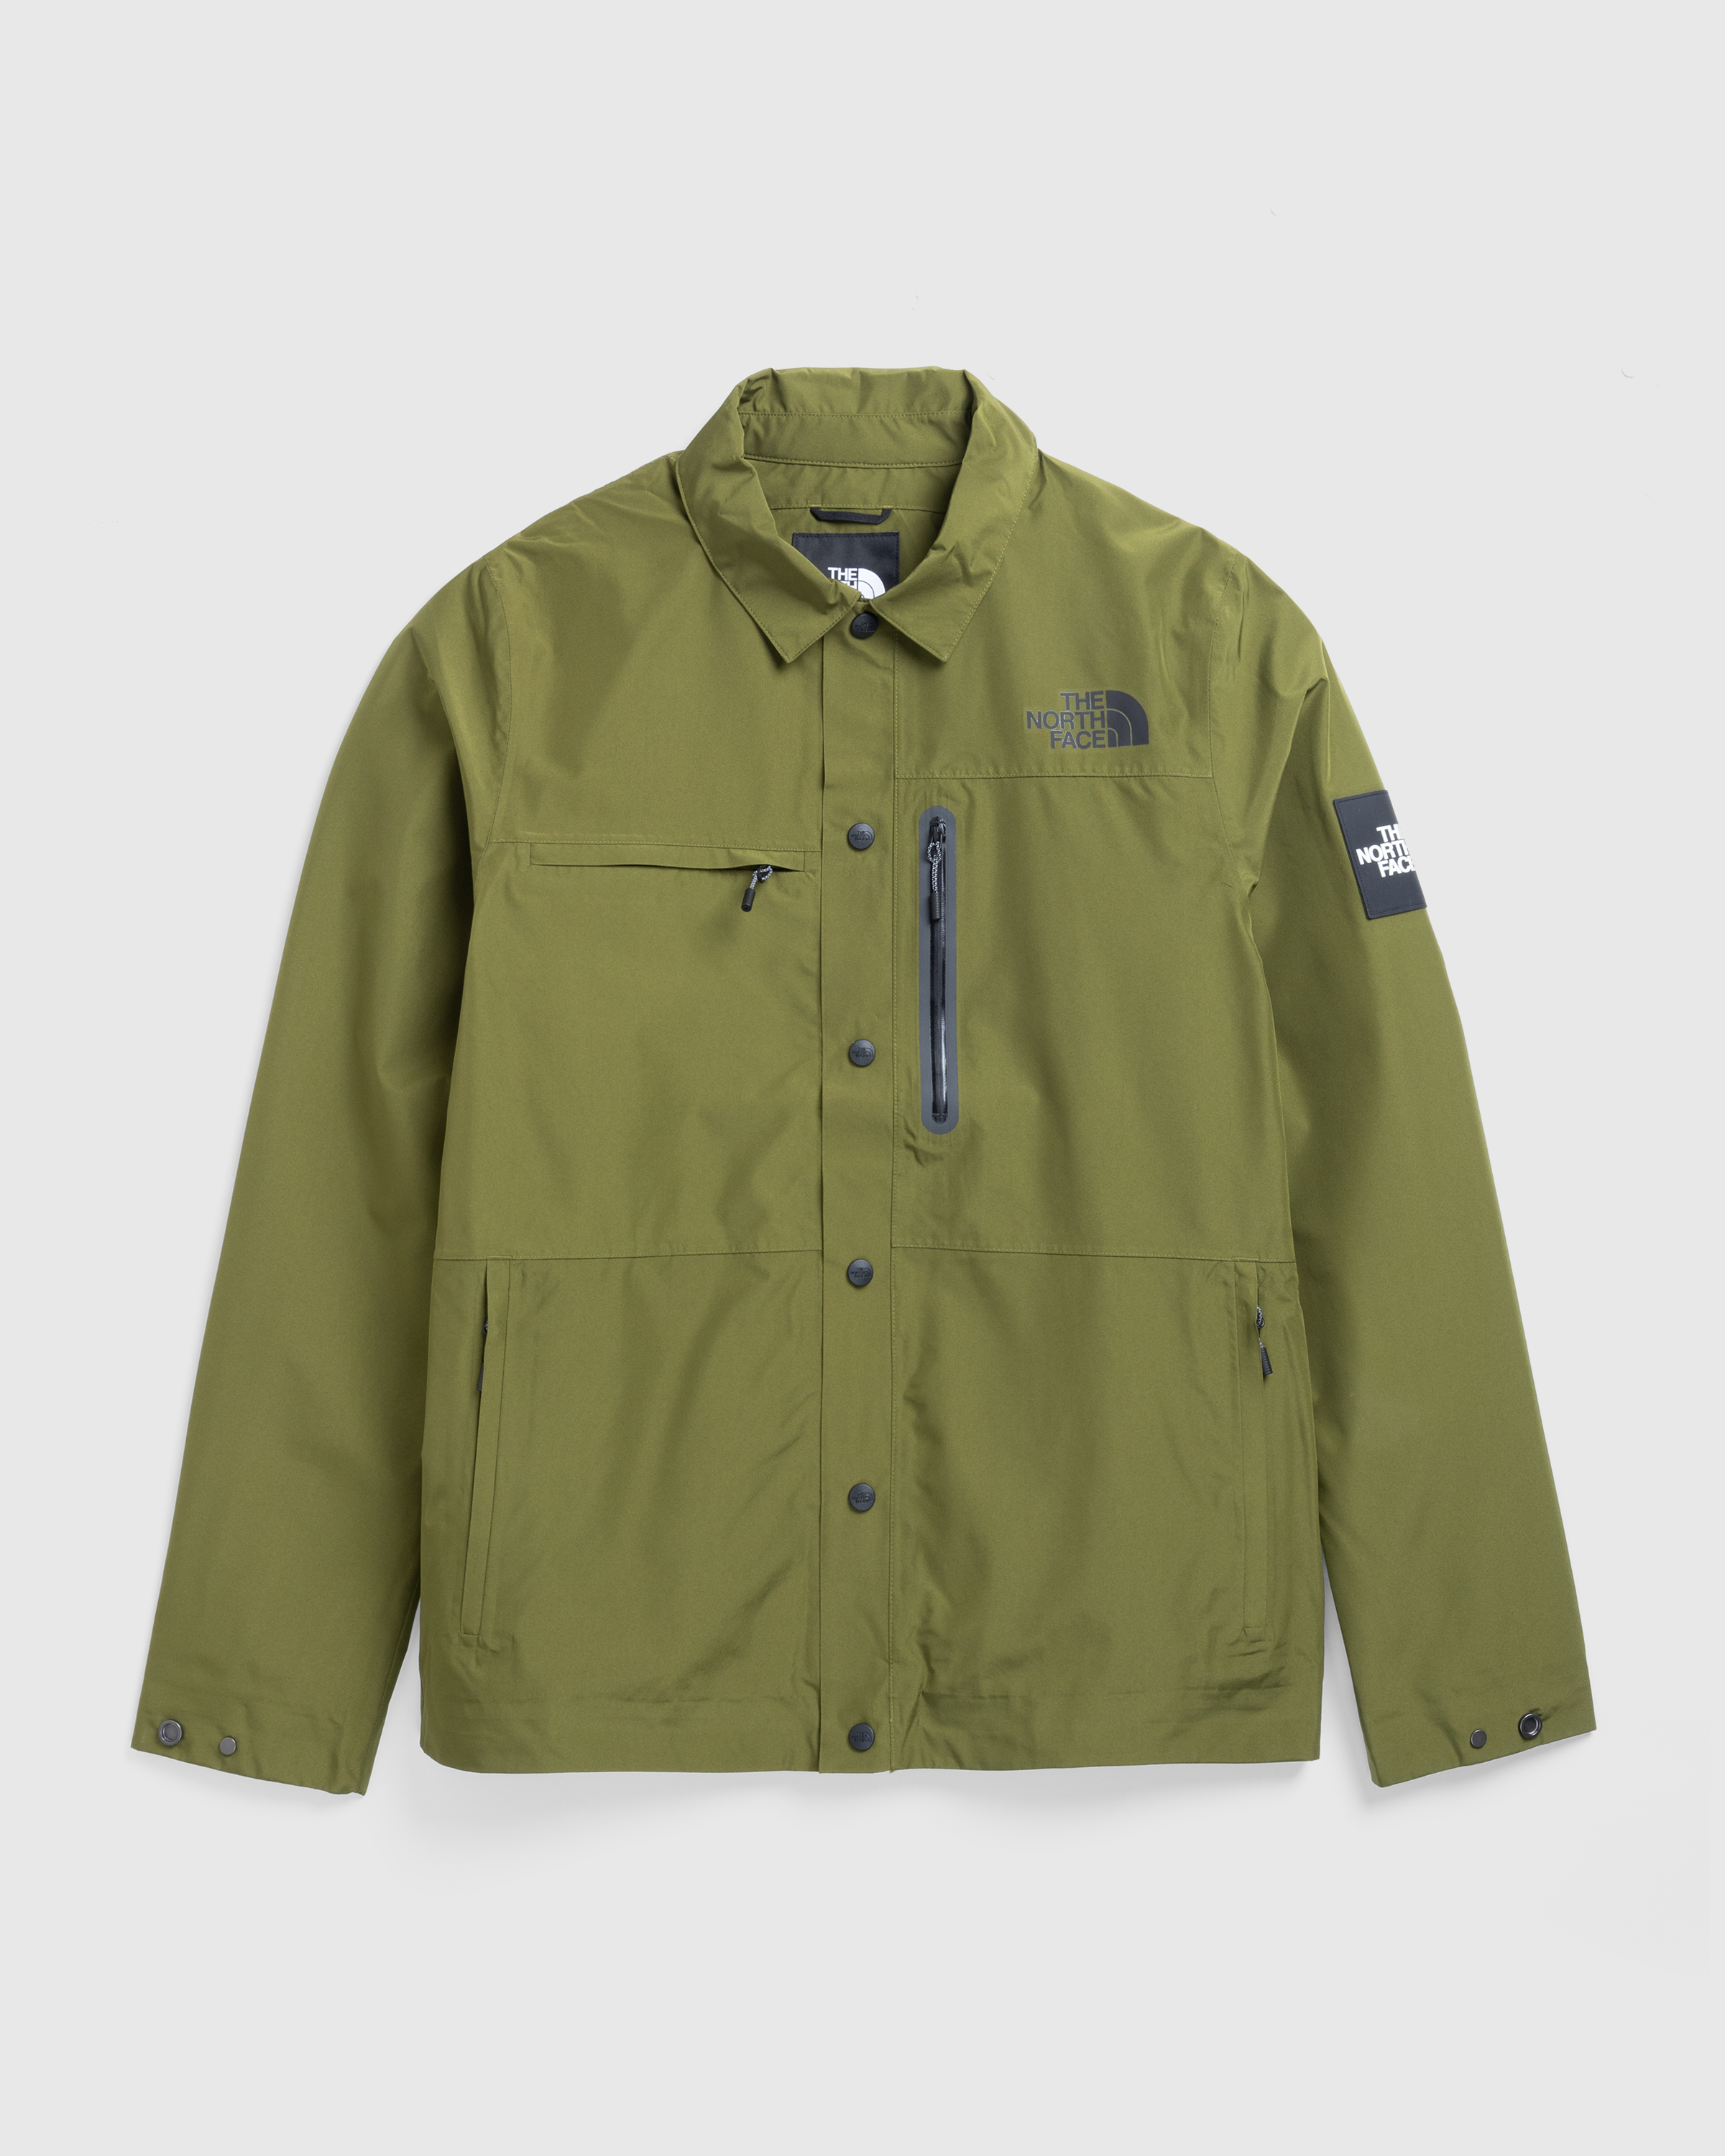 The North Face – Amos Tech Overshirt Forest Olive - Overshirt - Green - Image 1